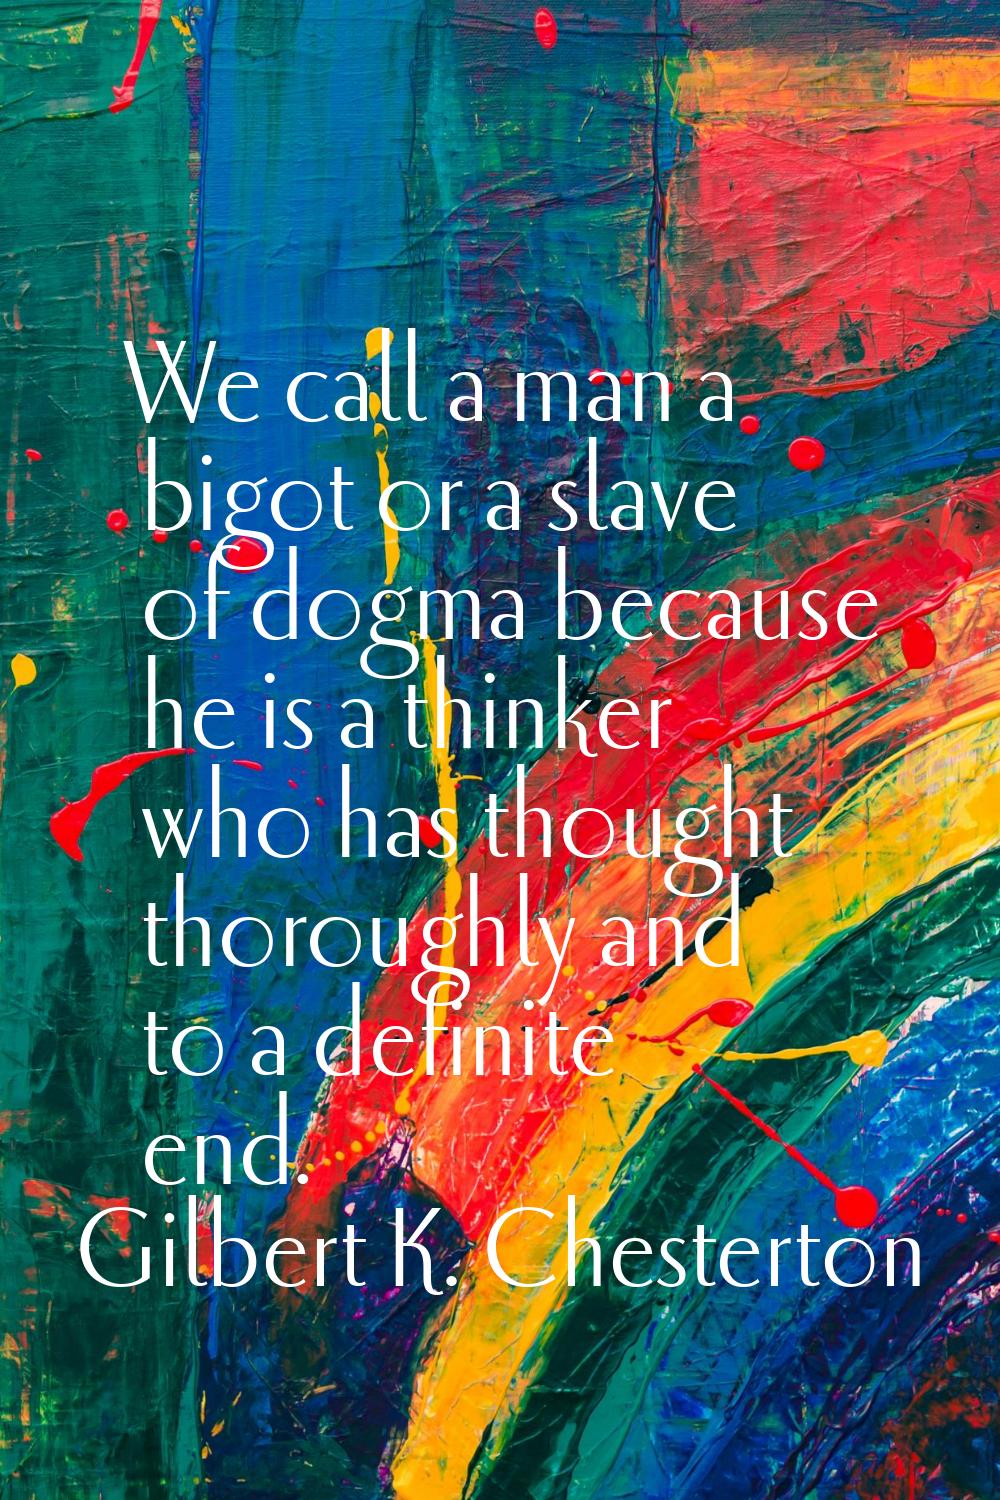 We call a man a bigot or a slave of dogma because he is a thinker who has thought thoroughly and to